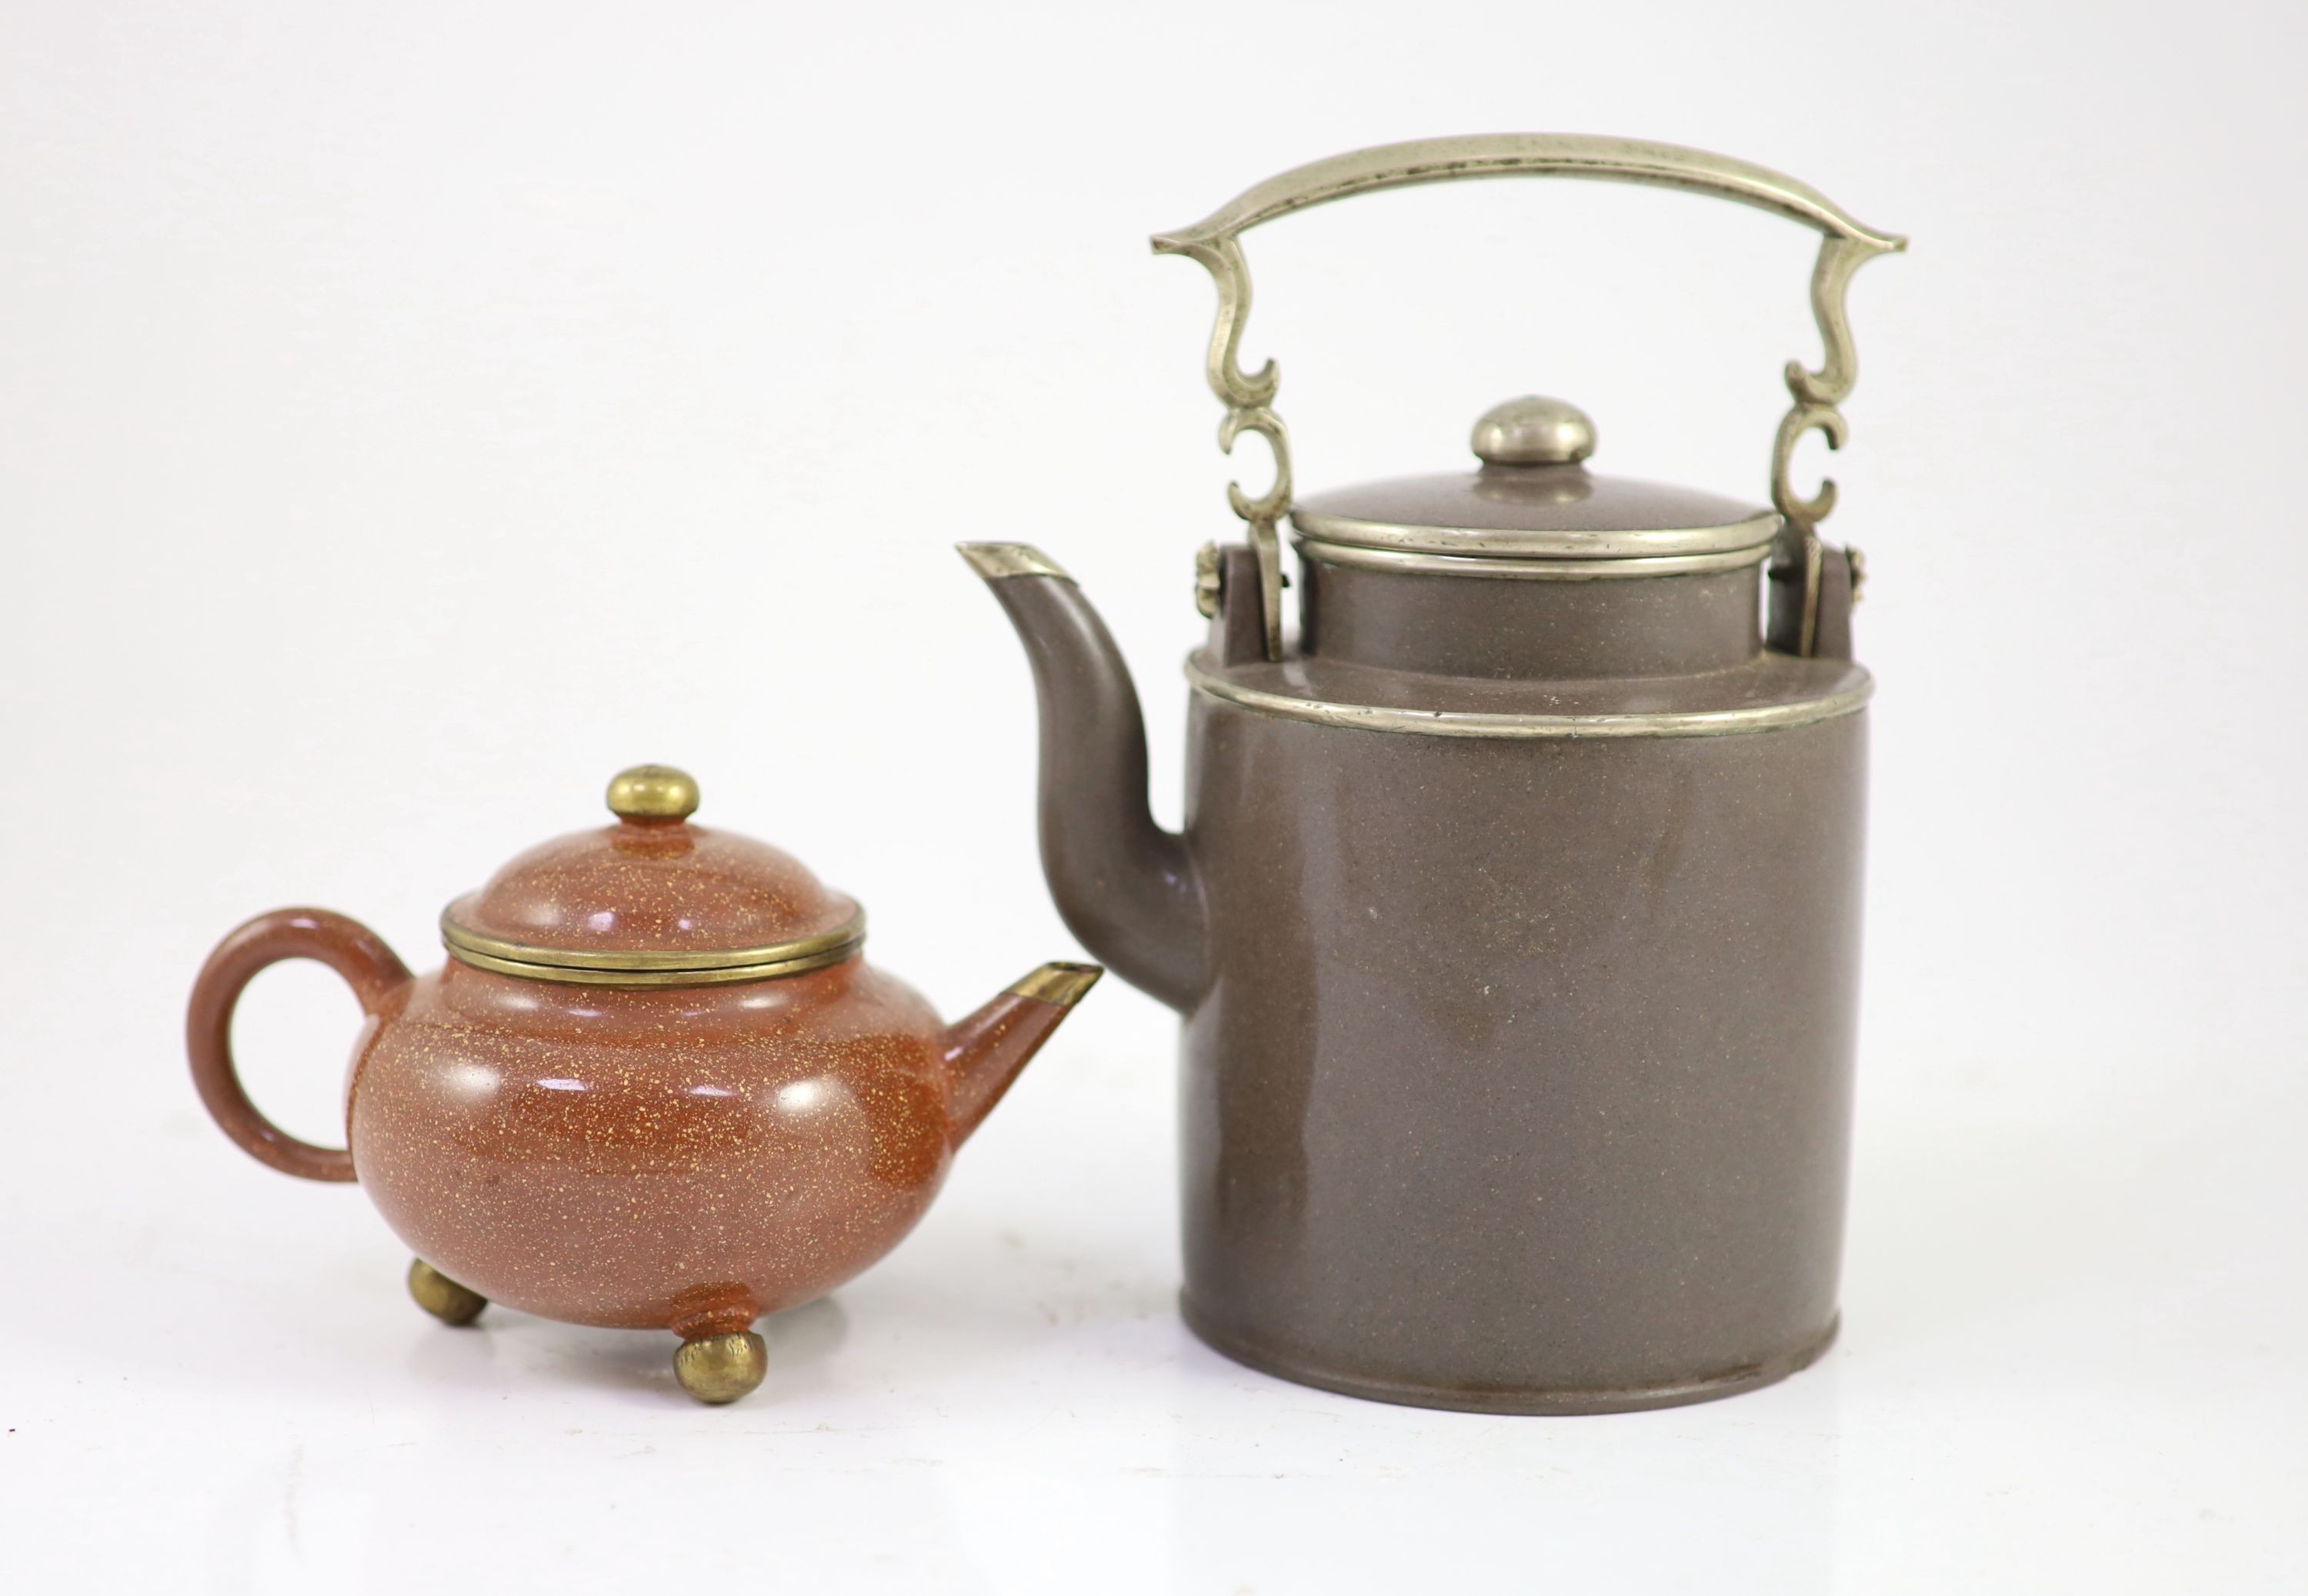 Two Yixing polished teapots made for the Thai market, late 19th century, 19.5 and 9.5 cm high